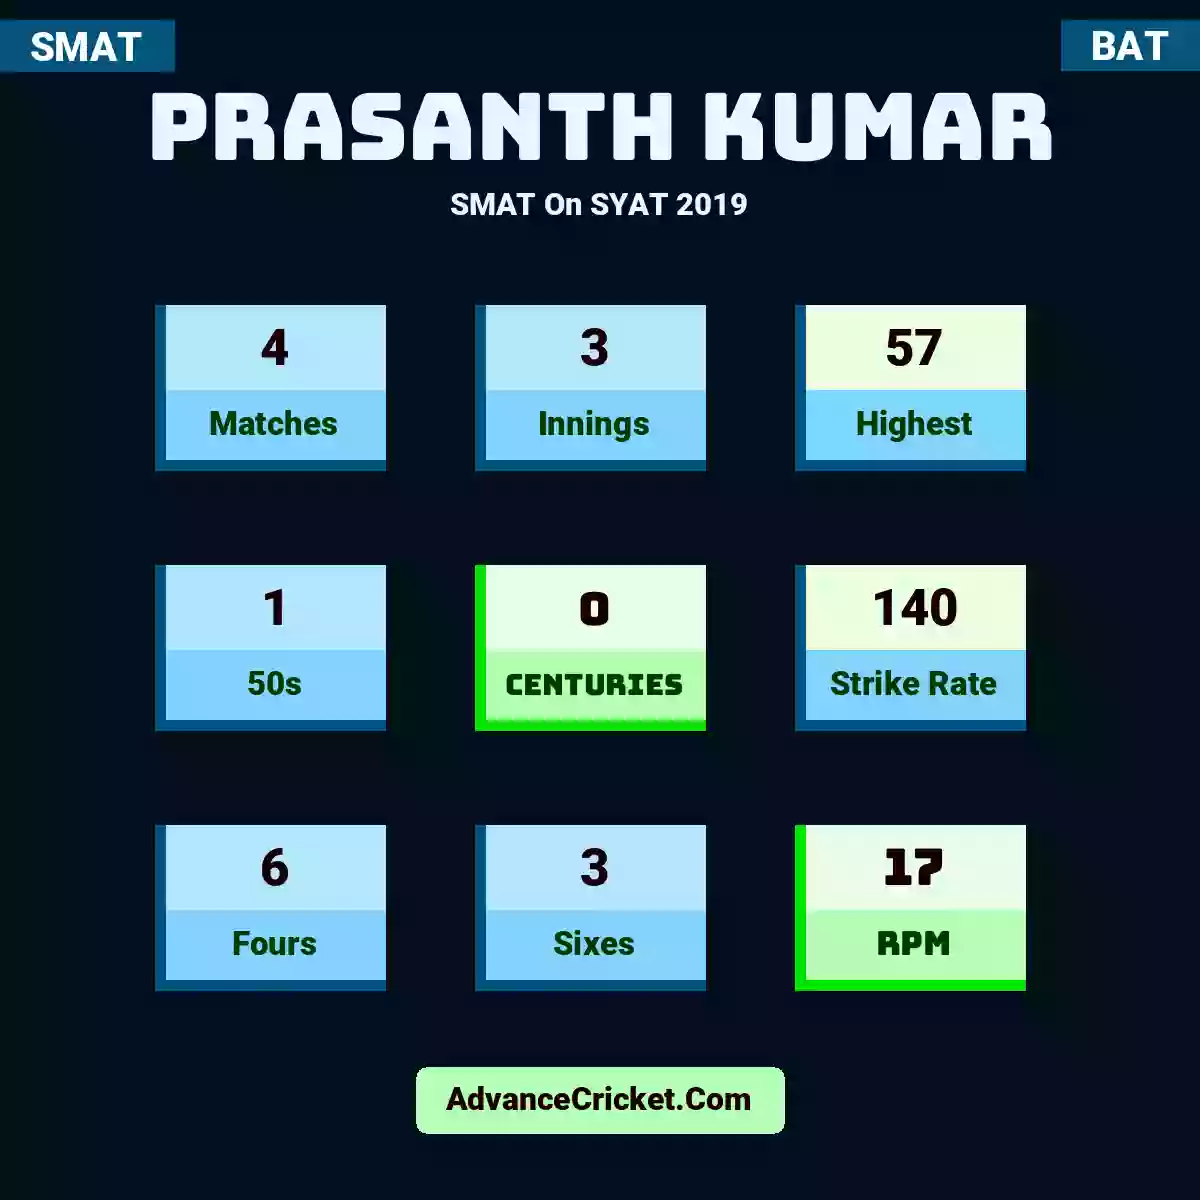 Prasanth Kumar SMAT  On SYAT 2019, Prasanth Kumar played 4 matches, scored 57 runs as highest, 1 half-centuries, and 0 centuries, with a strike rate of 140. P.Kumar hit 6 fours and 3 sixes, with an RPM of 17.